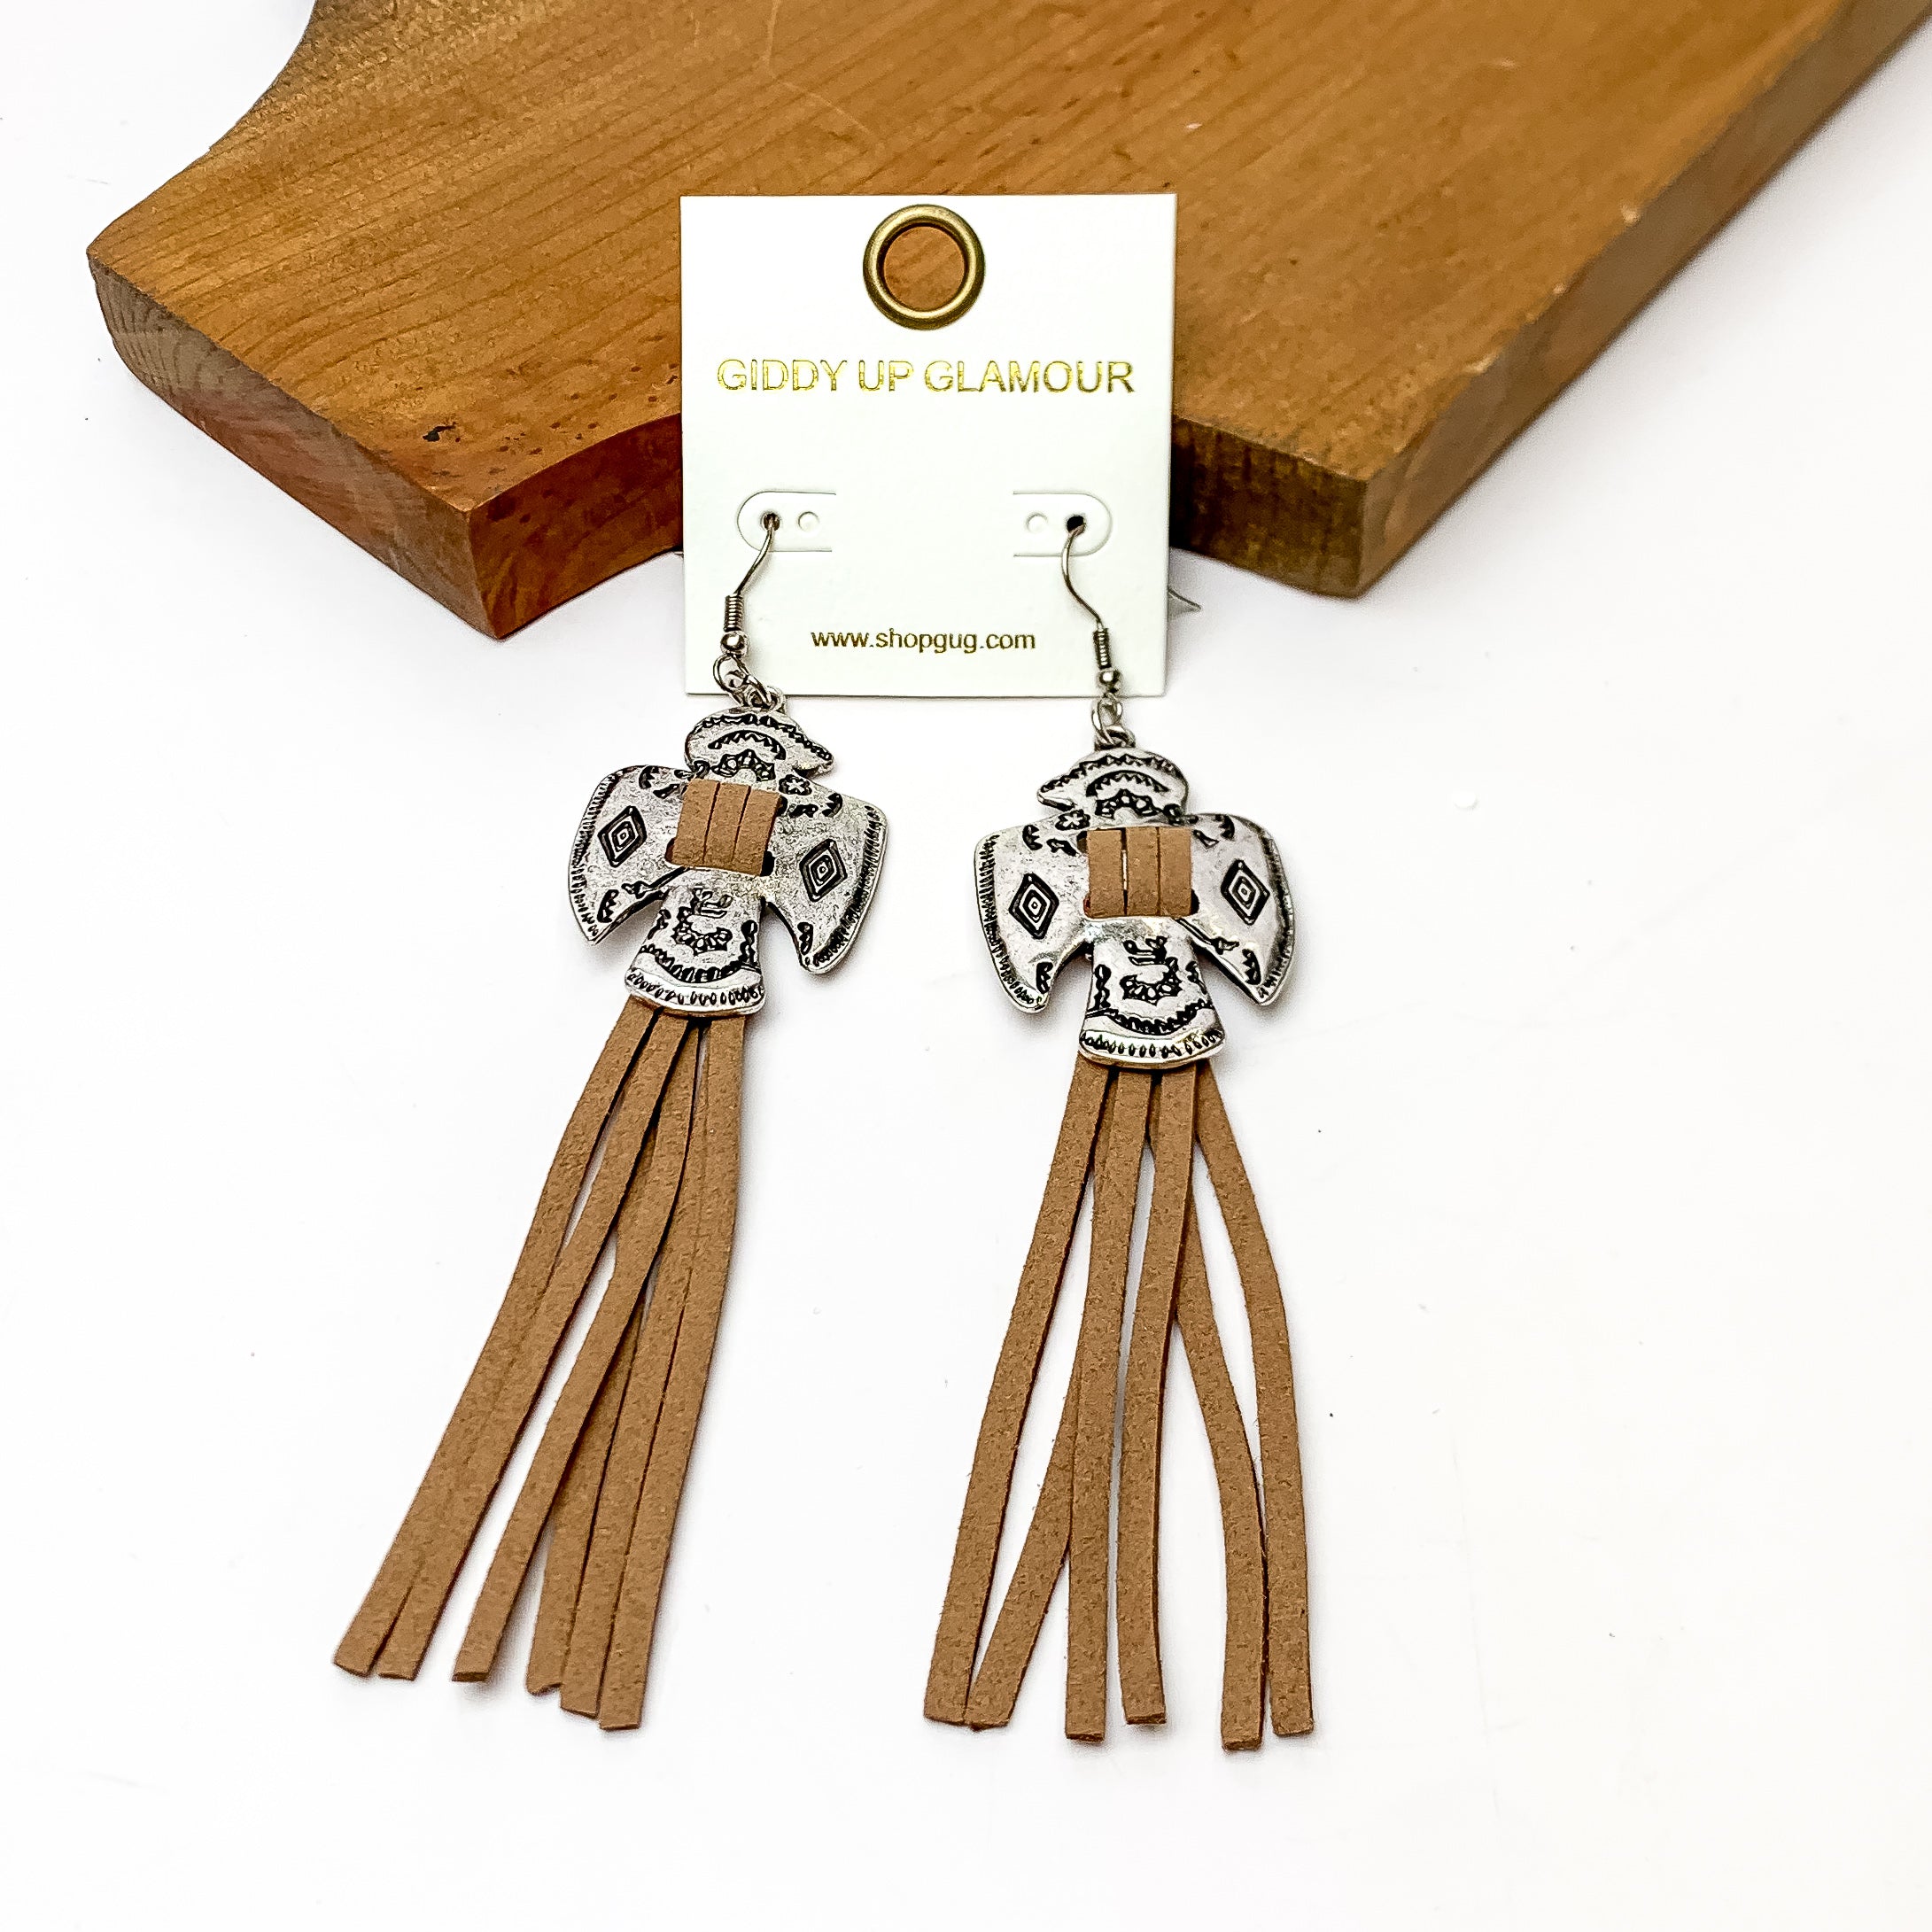 Thunderbird Tassel Earrings in Brown. These earrings are pictured laying against a wood piece. The background is white.